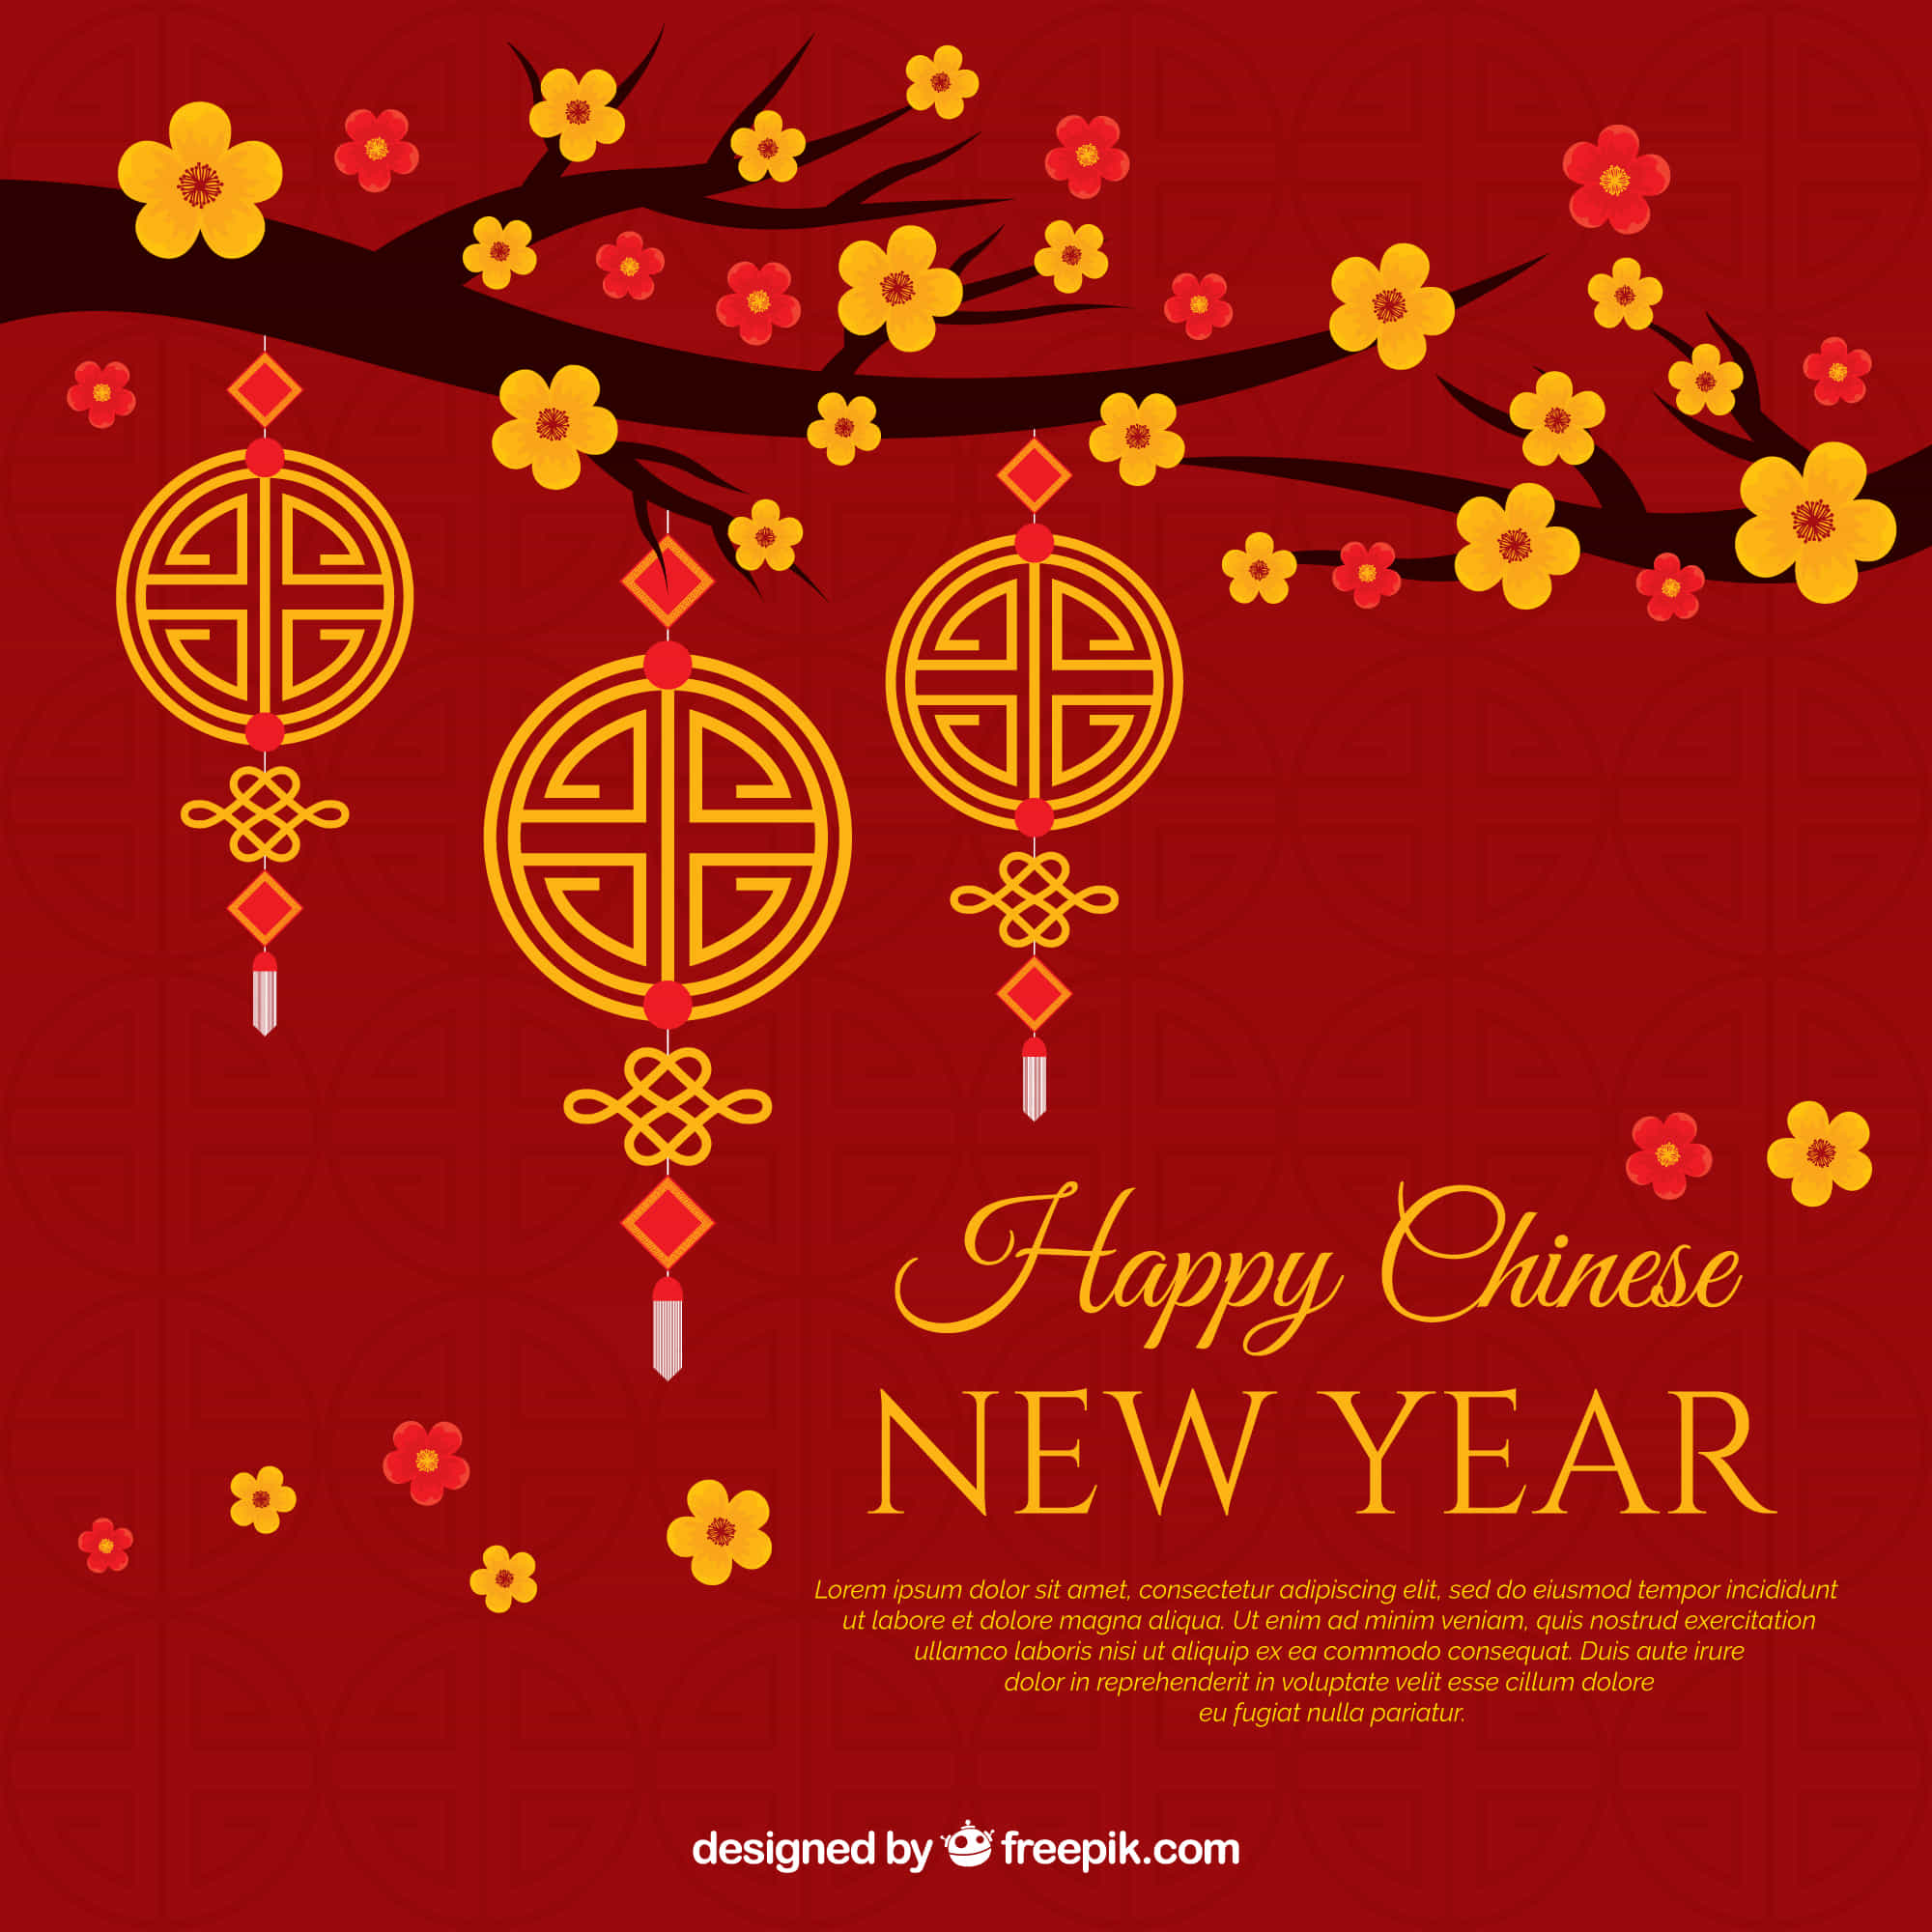 happy Chinese new year Photo Download